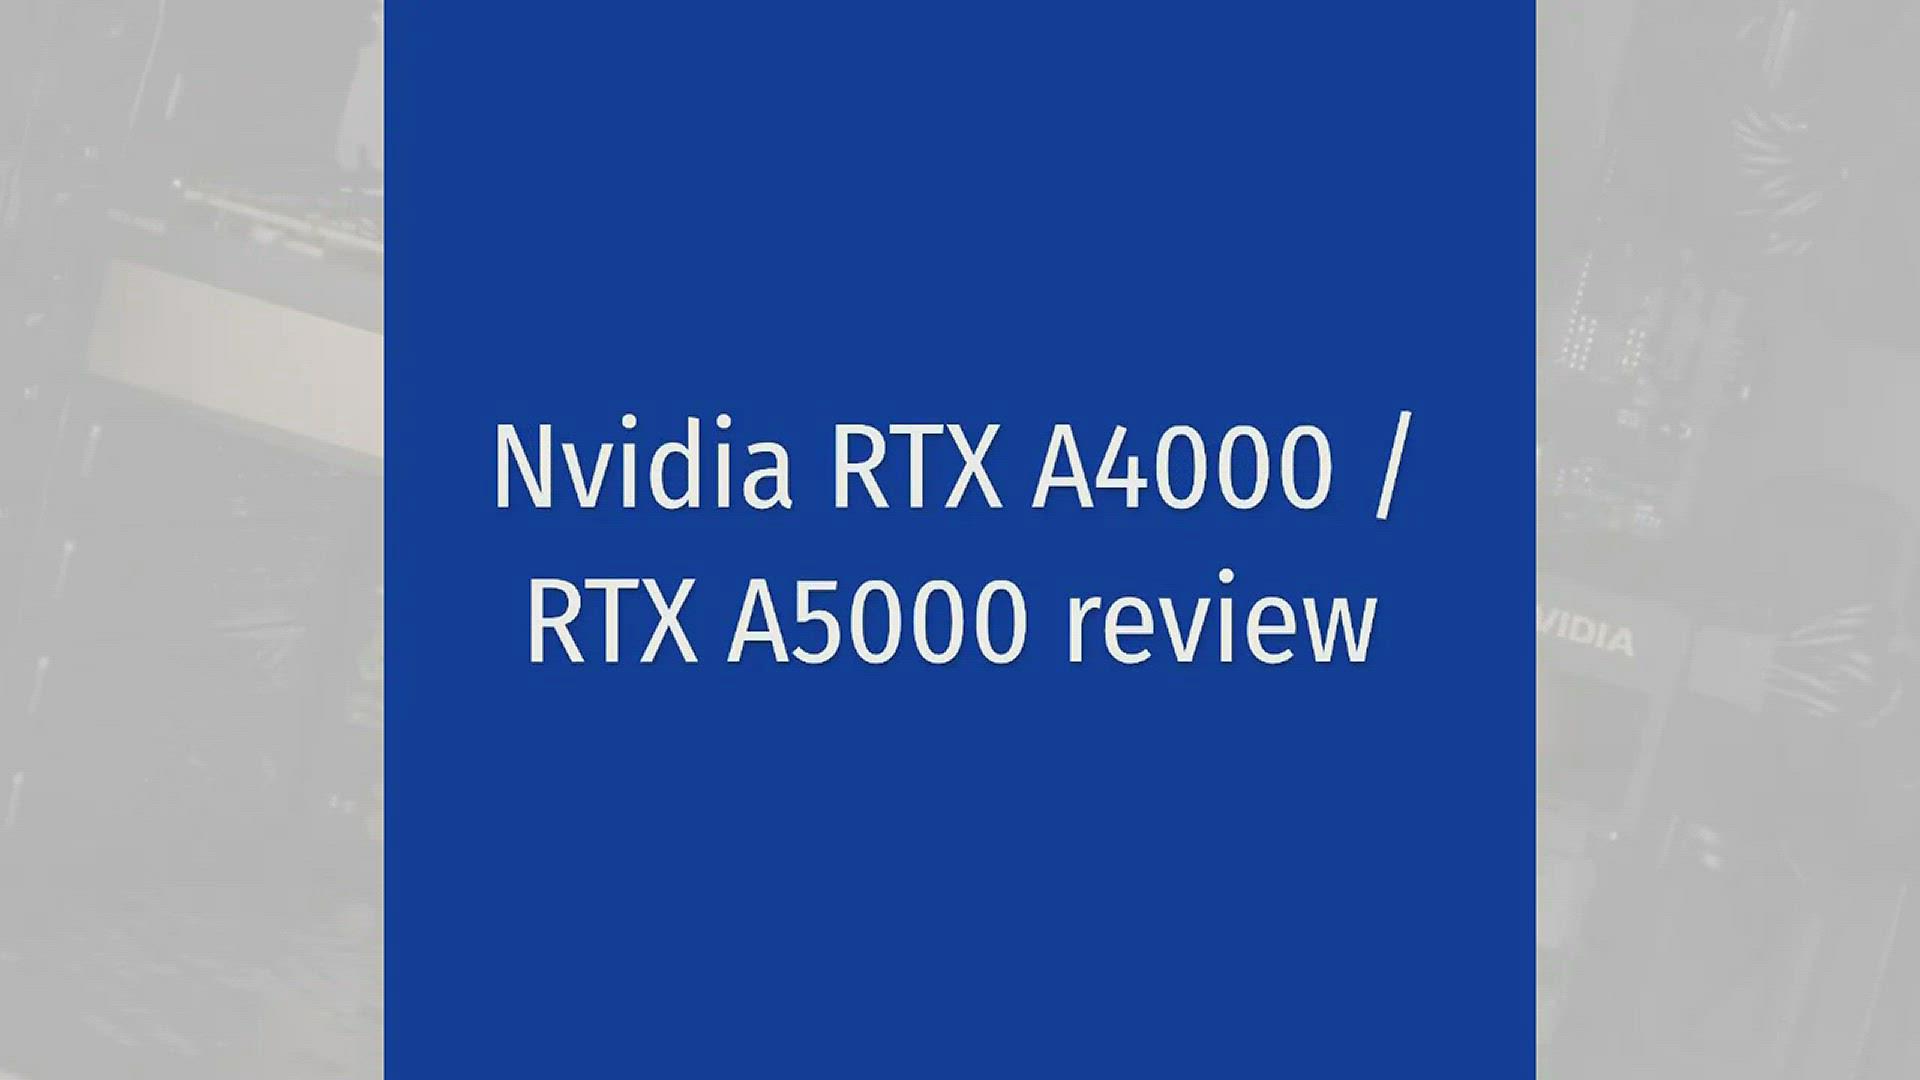 'Video thumbnail for Nvidia RTX A4000 / RTX A5000 review'